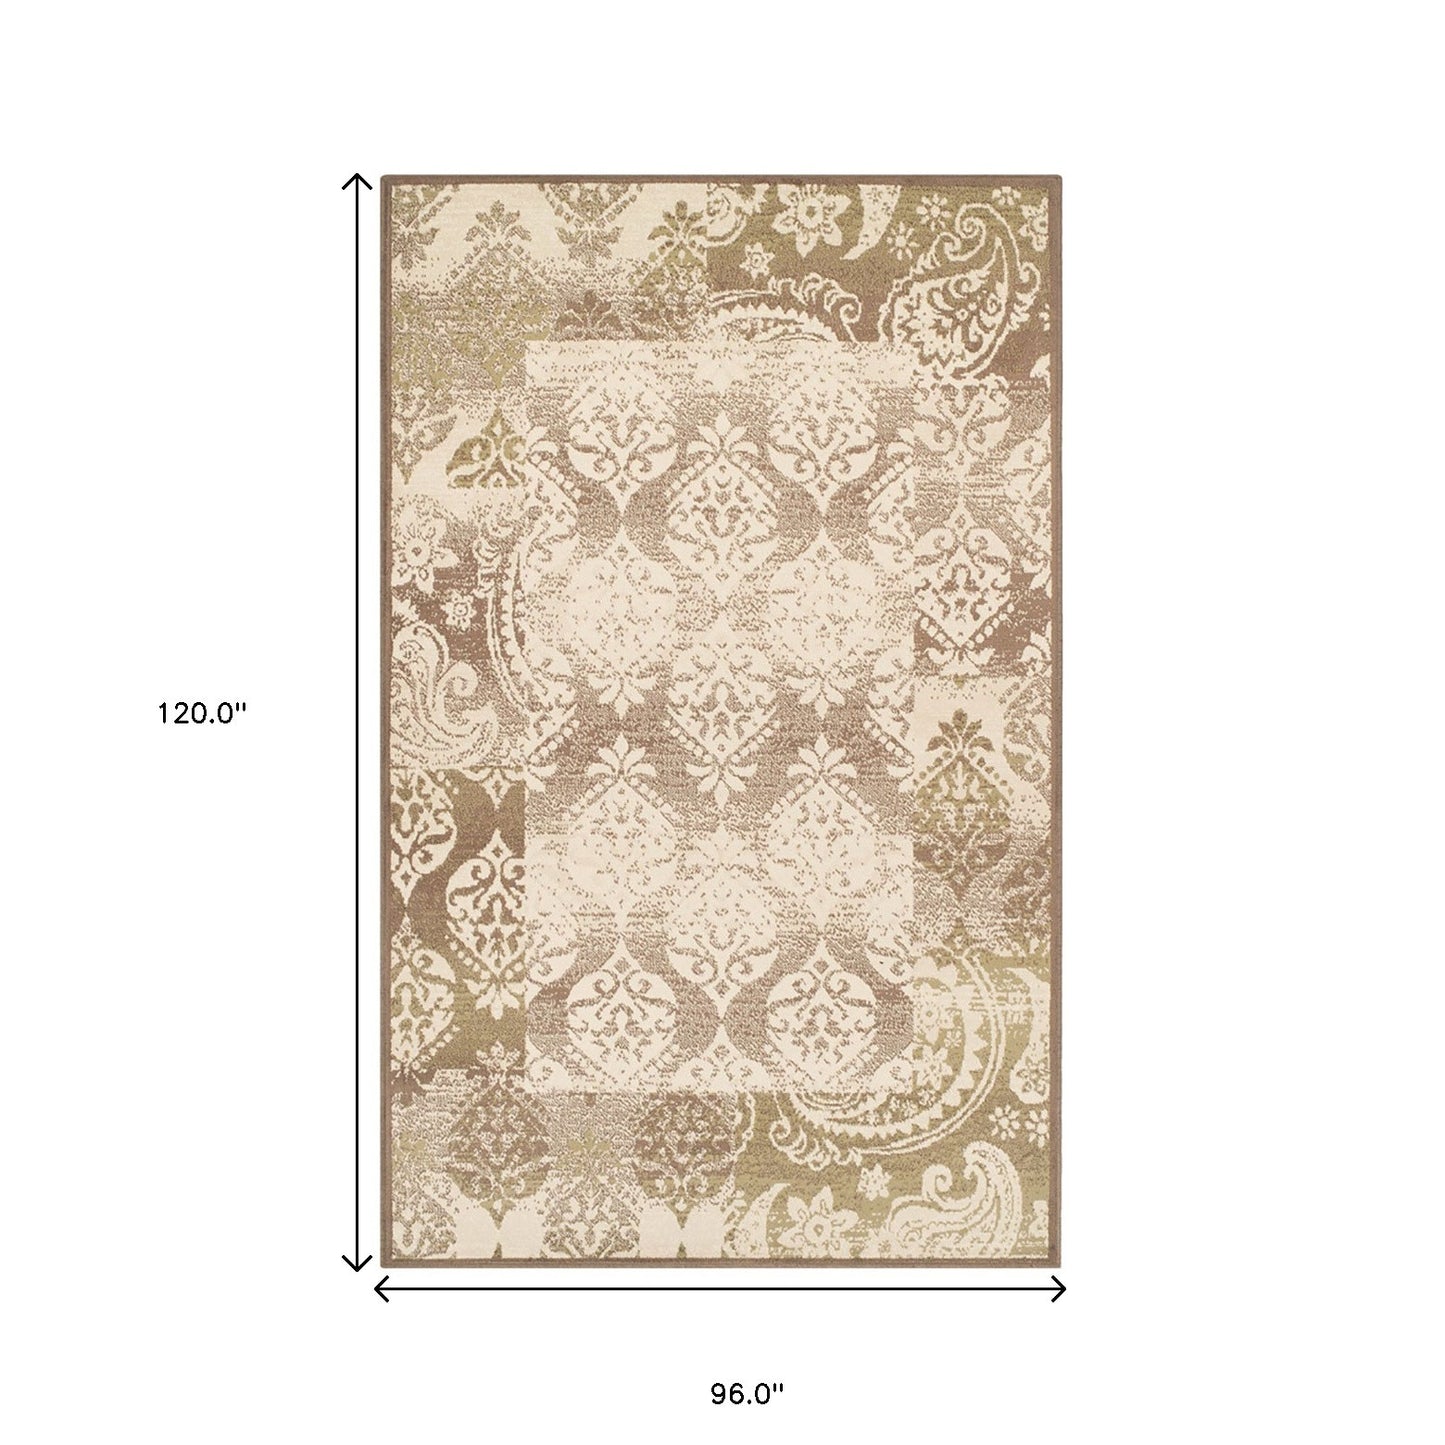 8' X 10' Brown Damask Power Loom Distressed Stain Resistant Area Rug